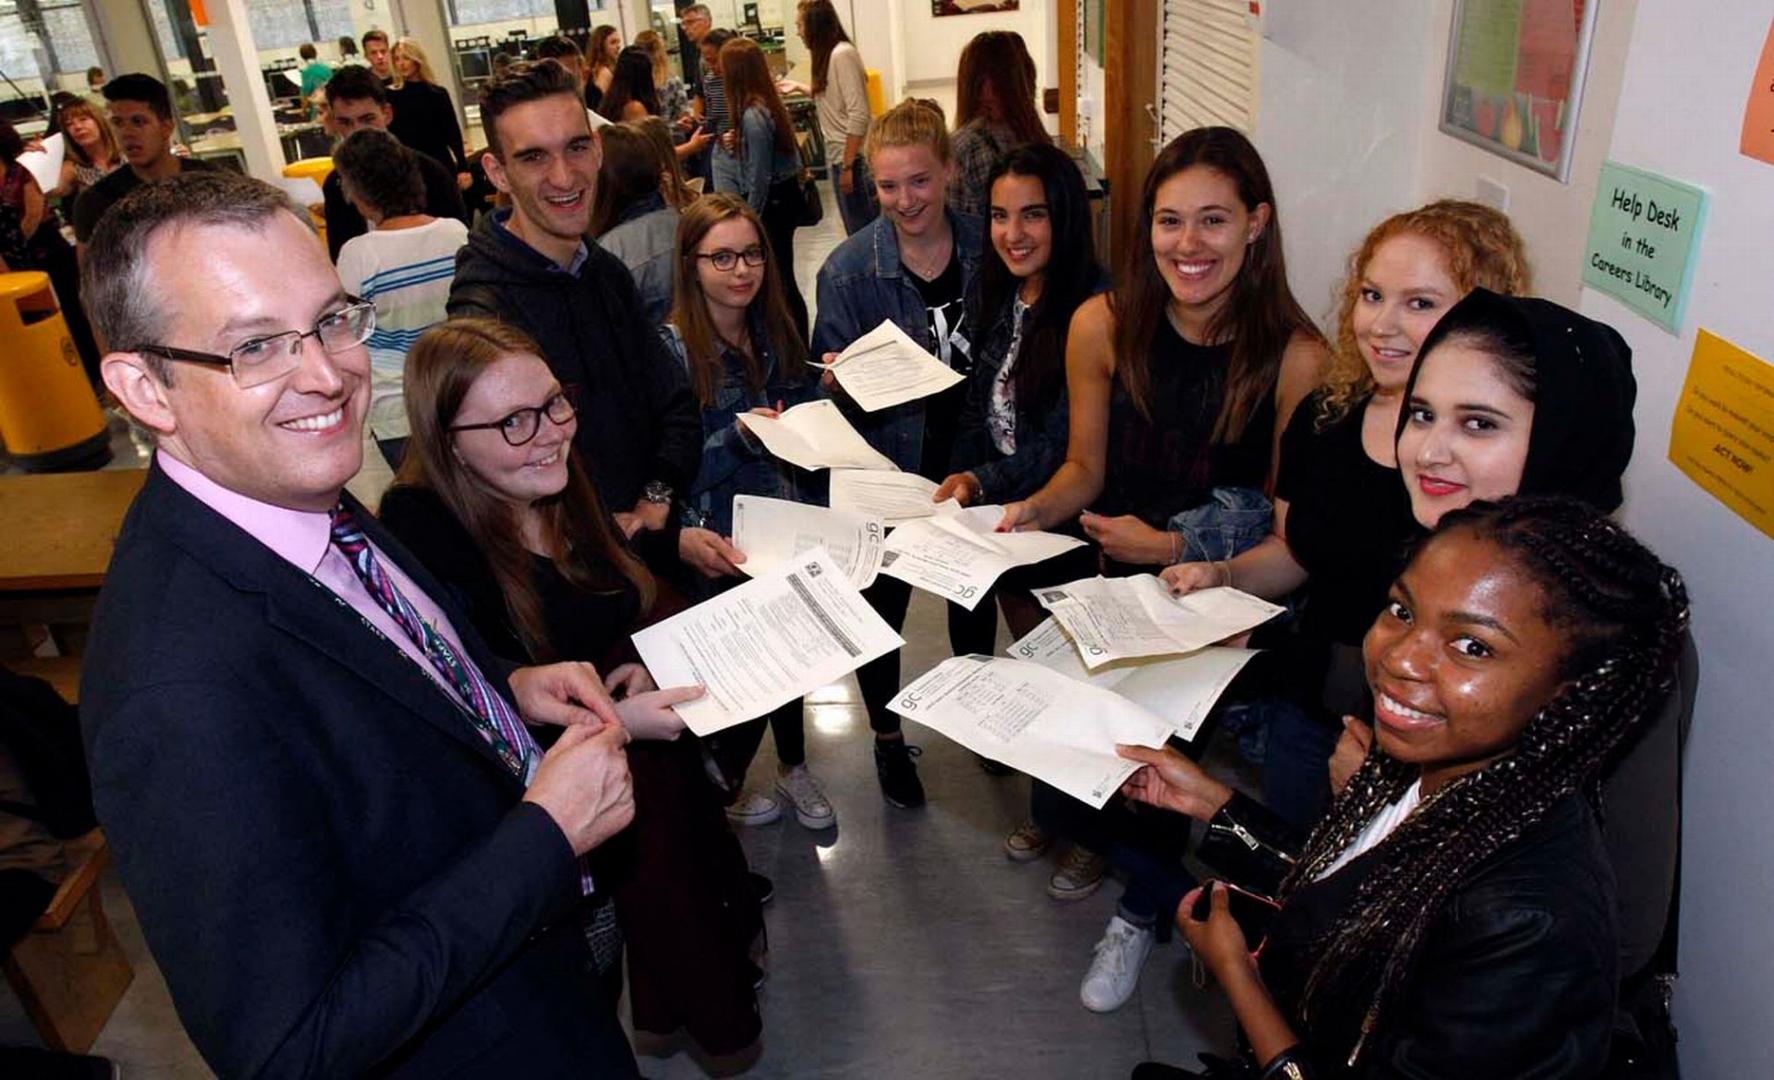 A Level results confirm Greenhead as leading provider of A Levels